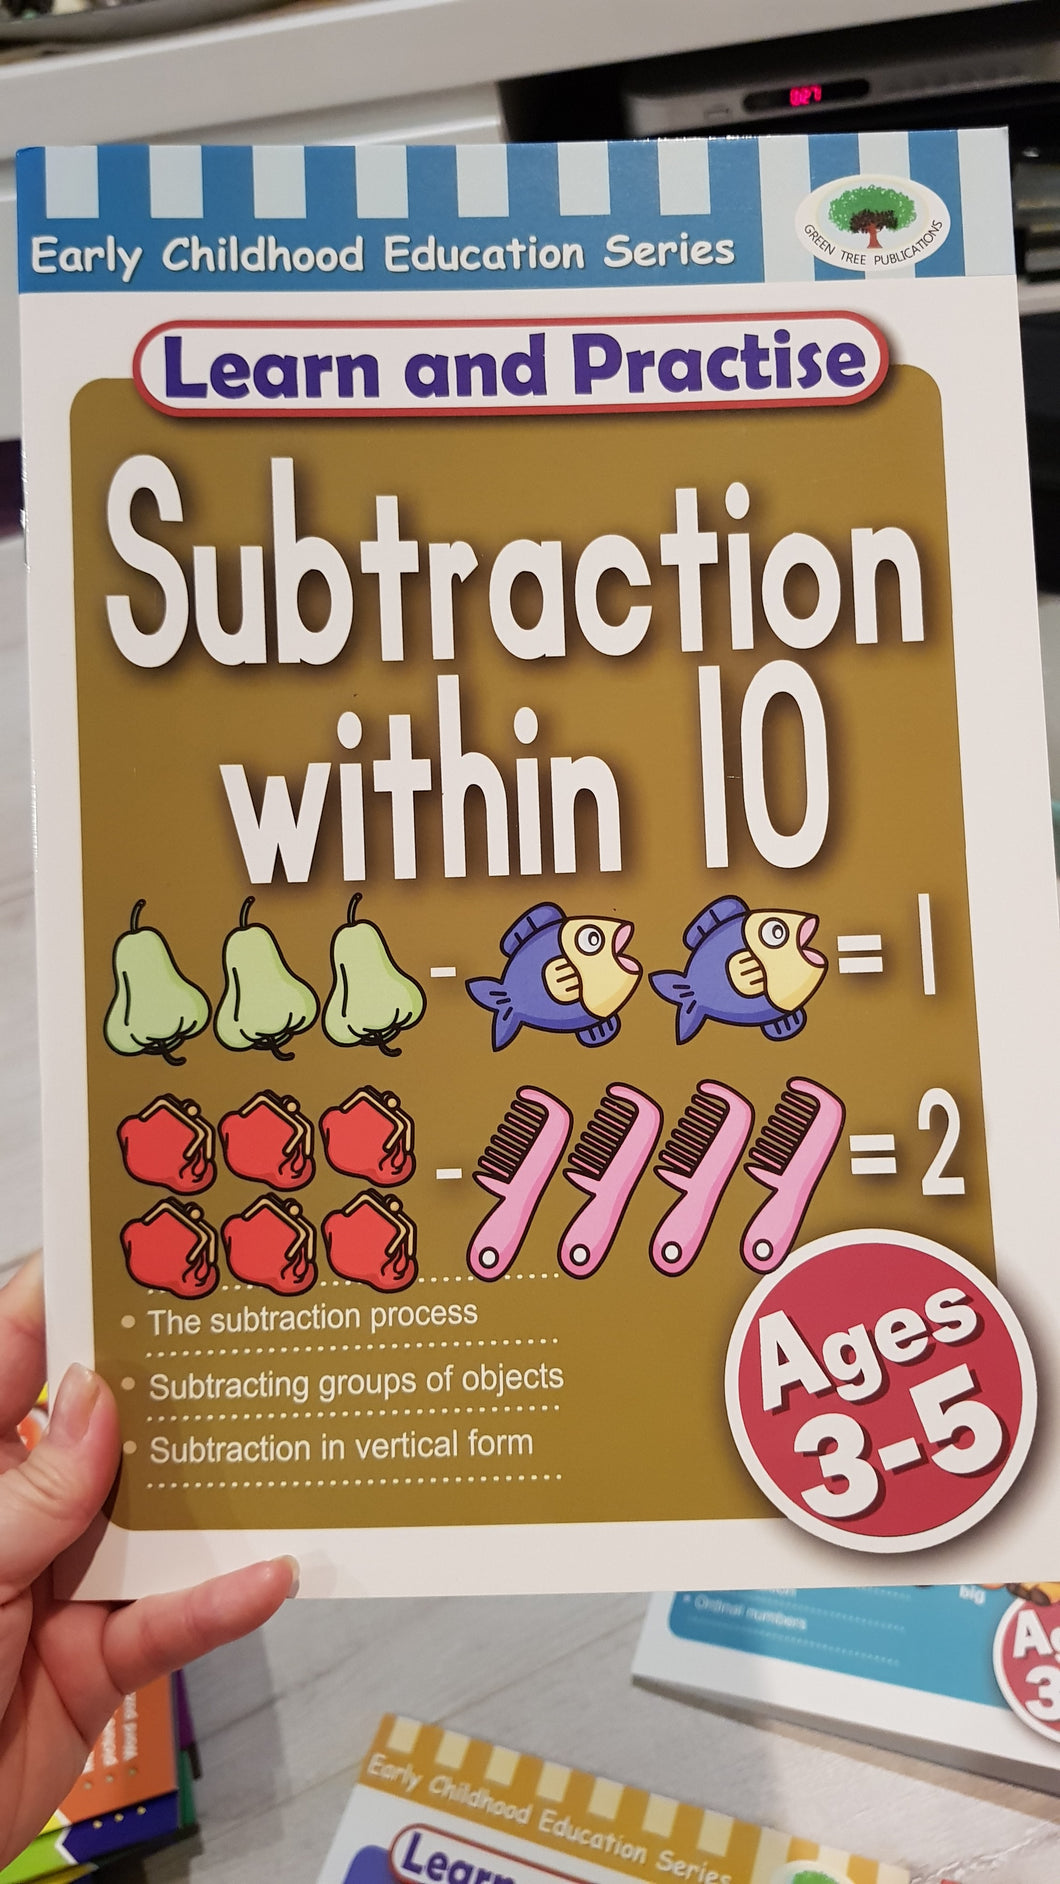 LEARN & PRACTISE SUBTRACTION WITHIN 10